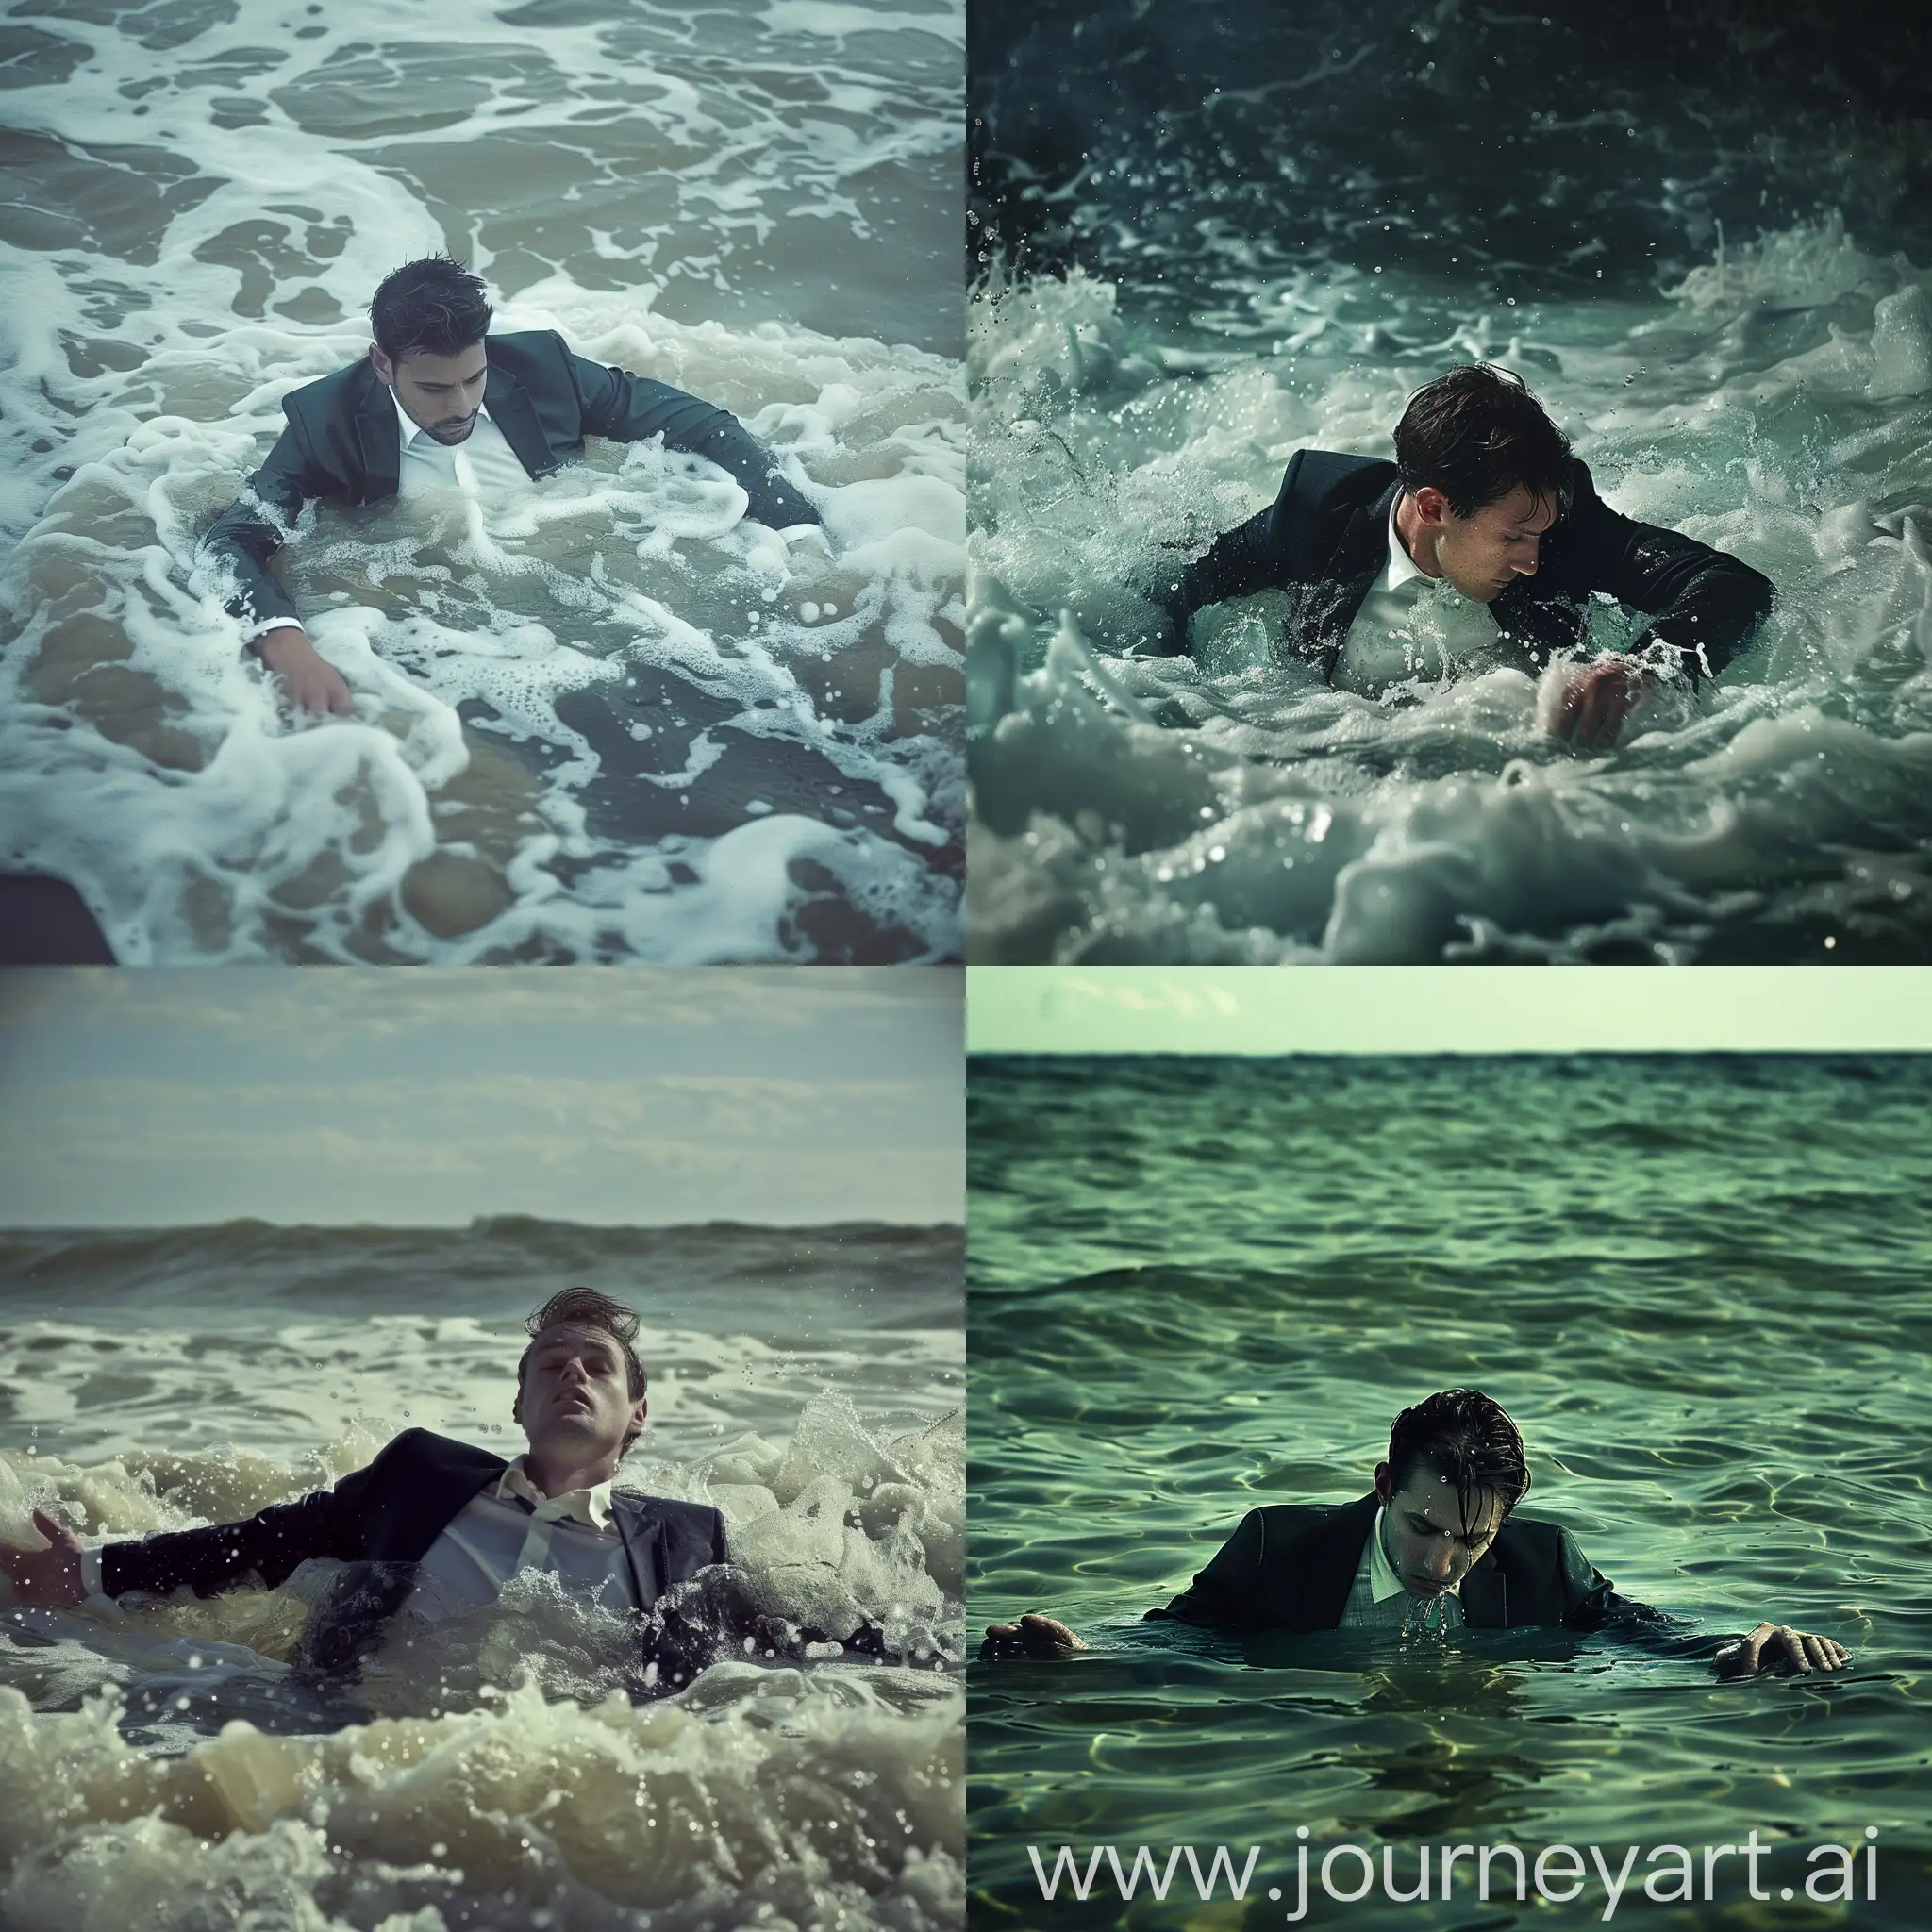 A man in a suit drowning in sea water